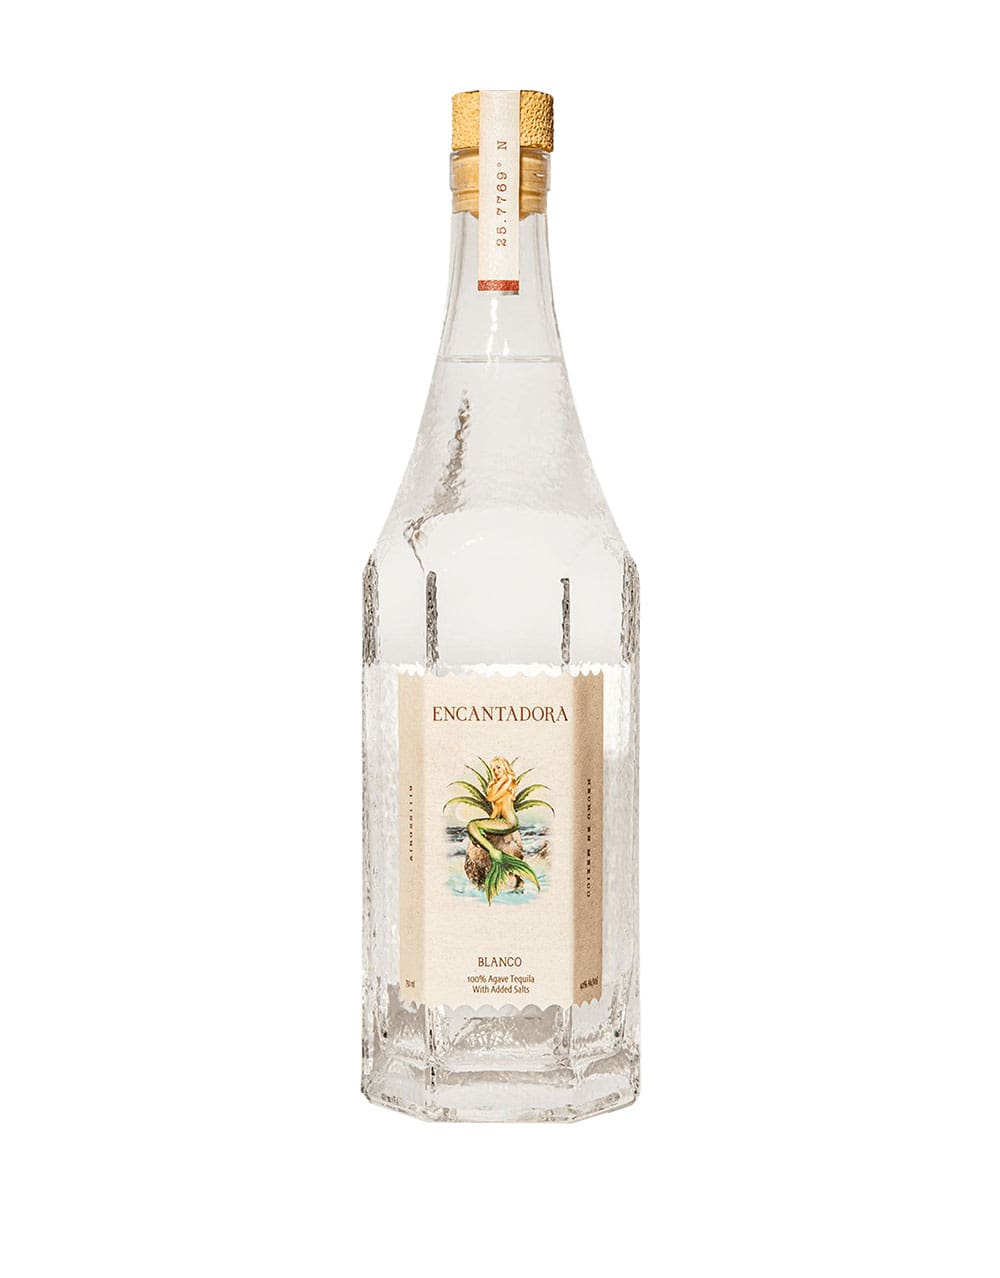 Encantadora Blanco Tequila Infused with Electrolytes